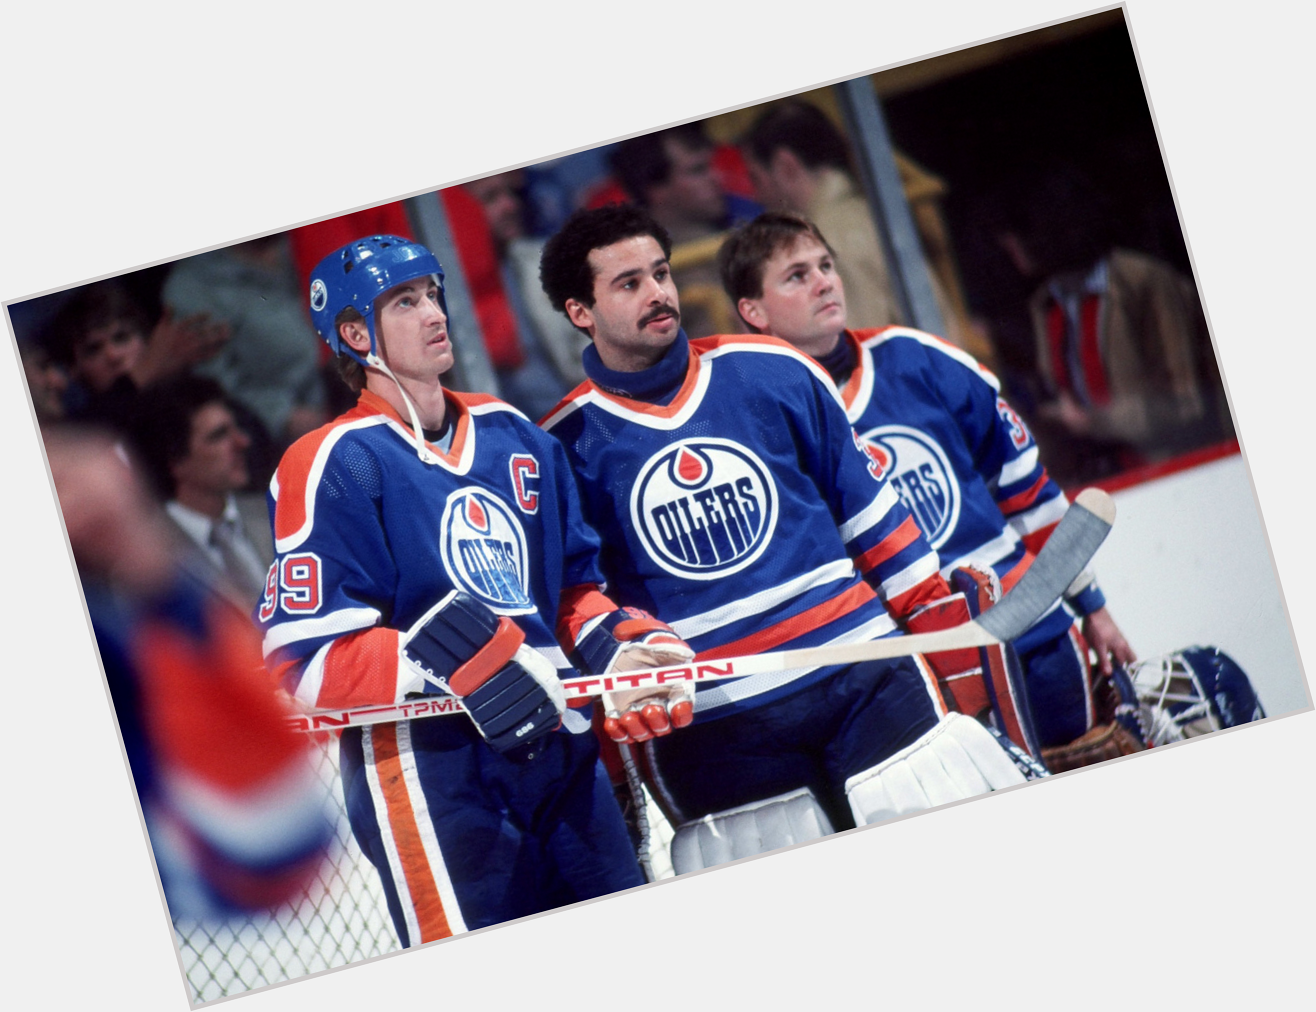 Wishing a very Happy Birthday to Grant Fuhr! 